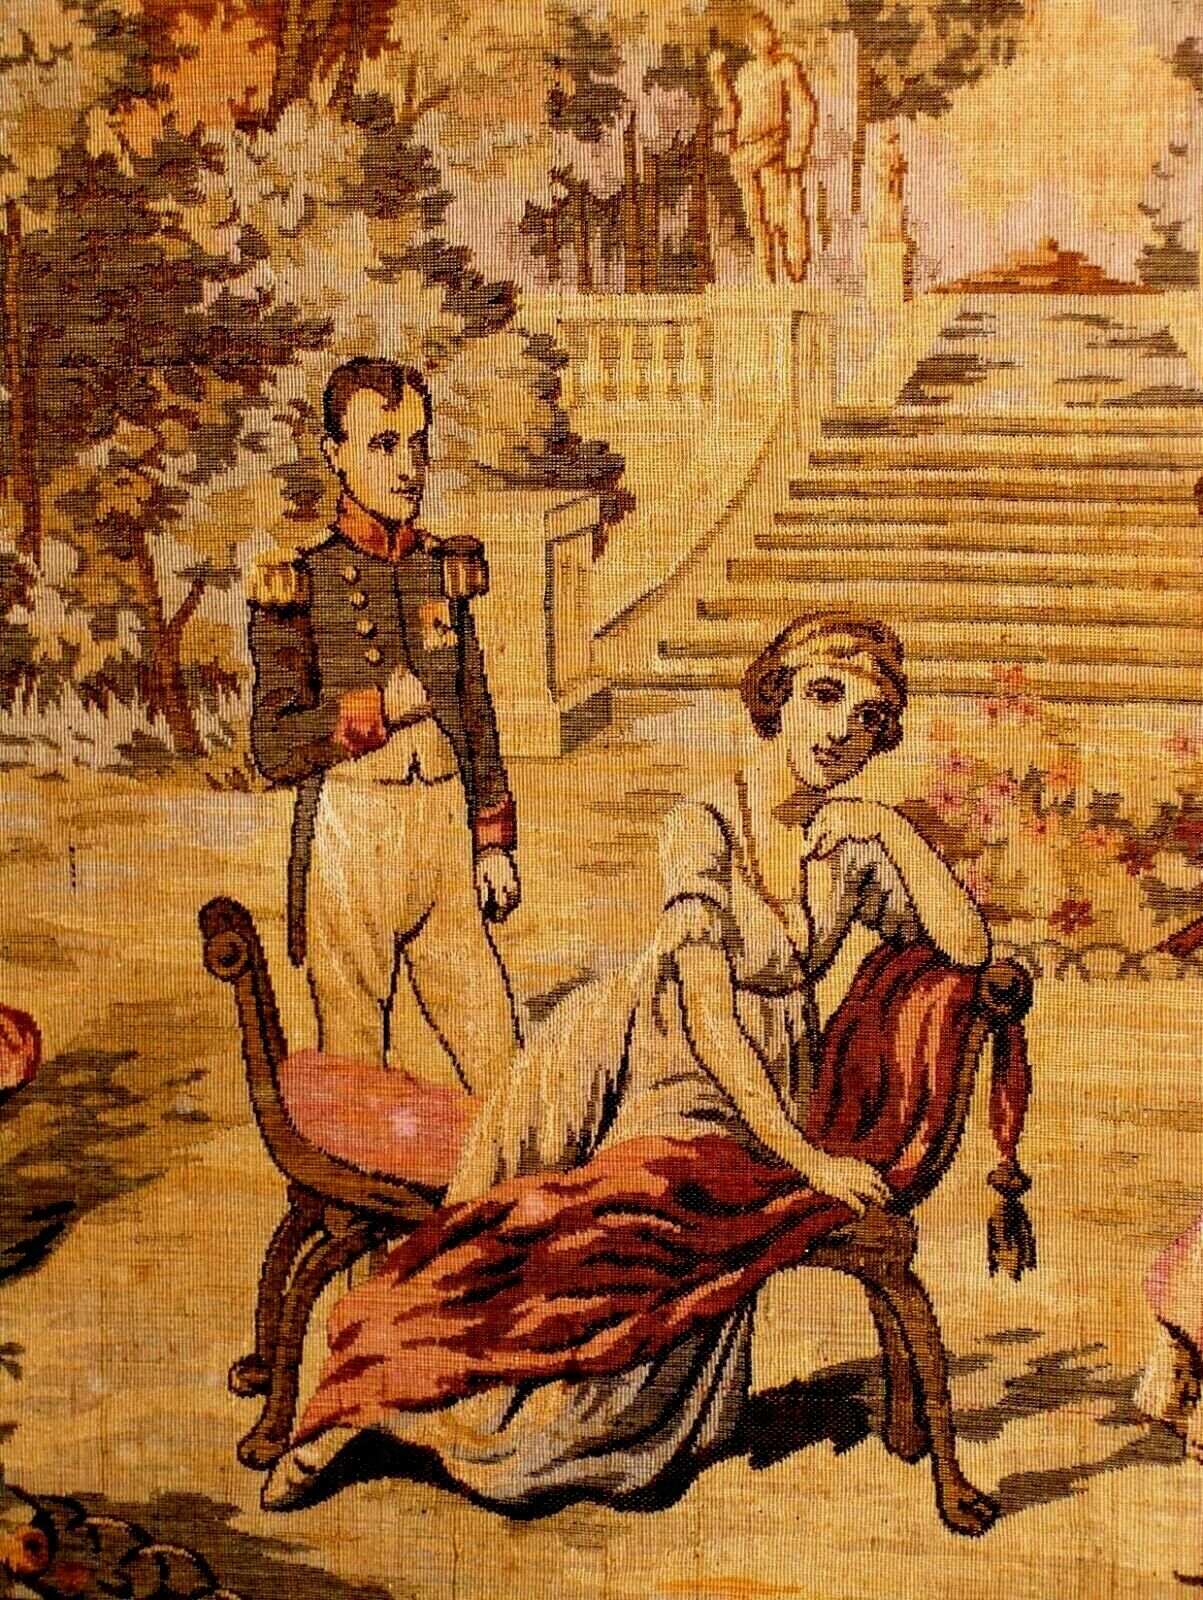 Huge Antique Vintage Romantic Royal Garden Love Courting French Wall Tapestry